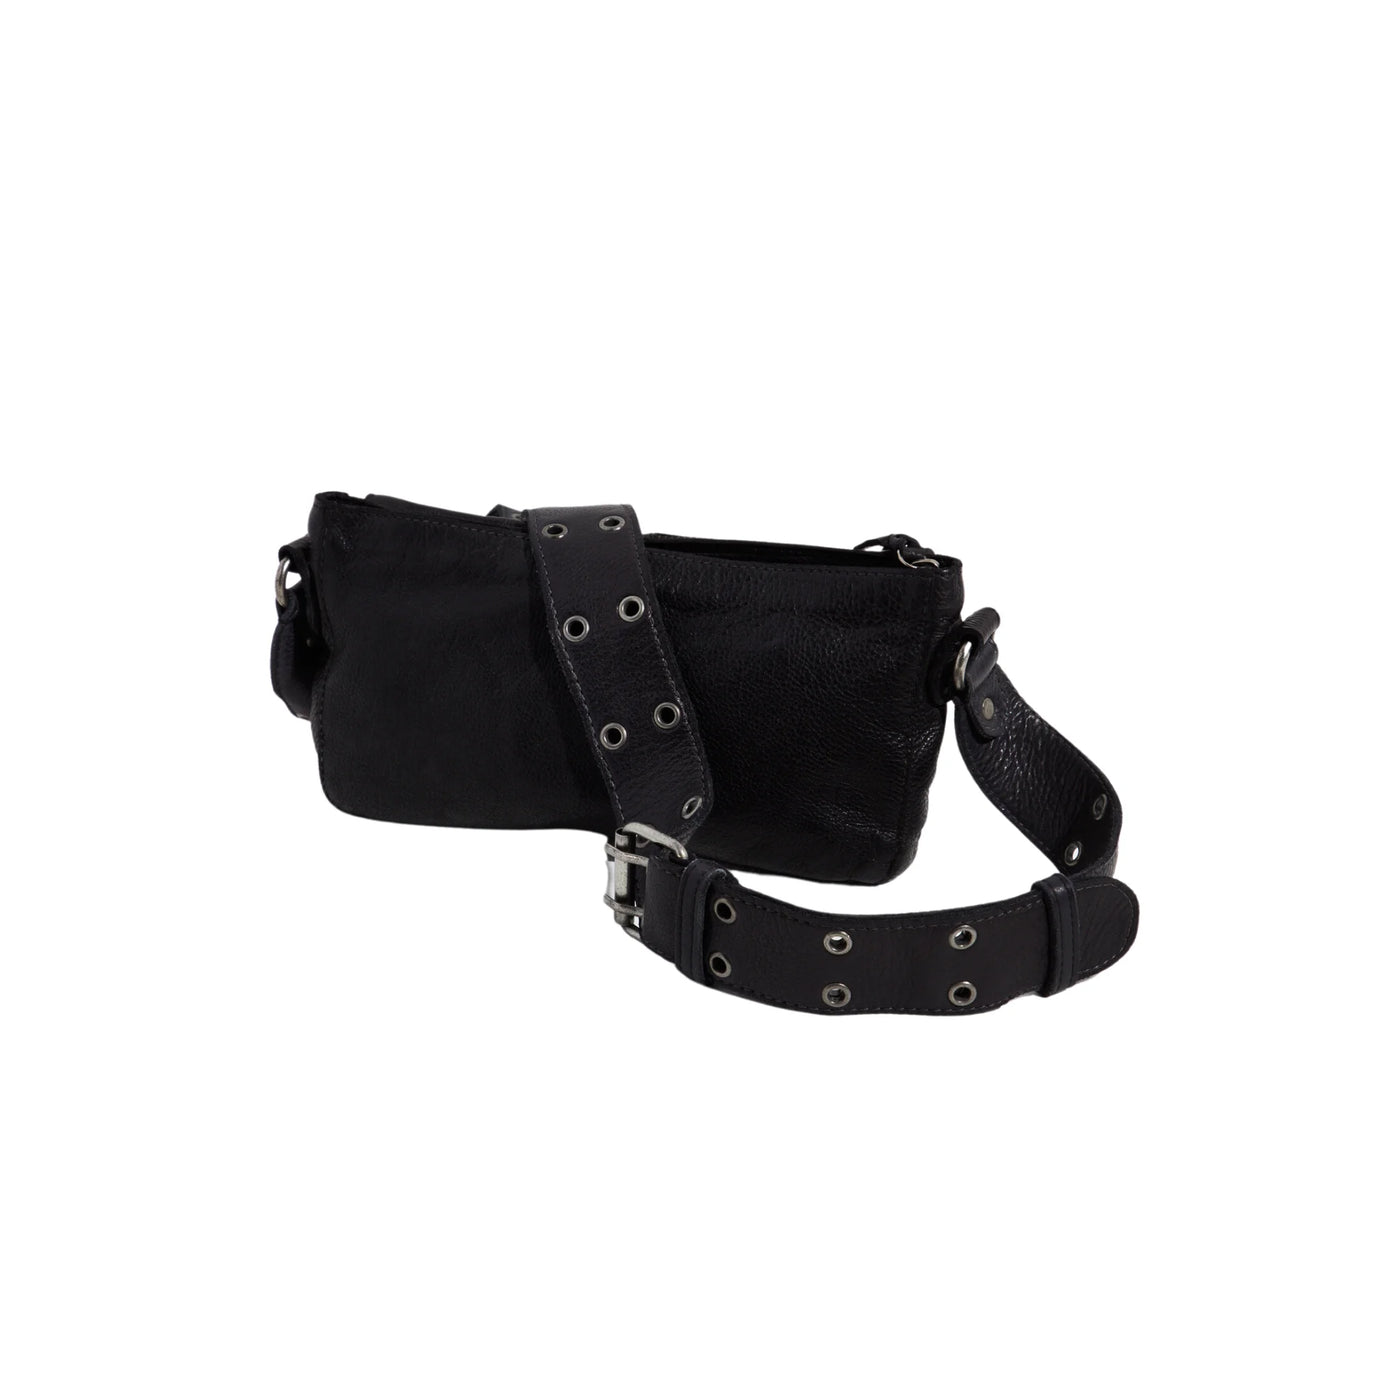 Wade Leather Sling Bag in Black - Madison's Niche 